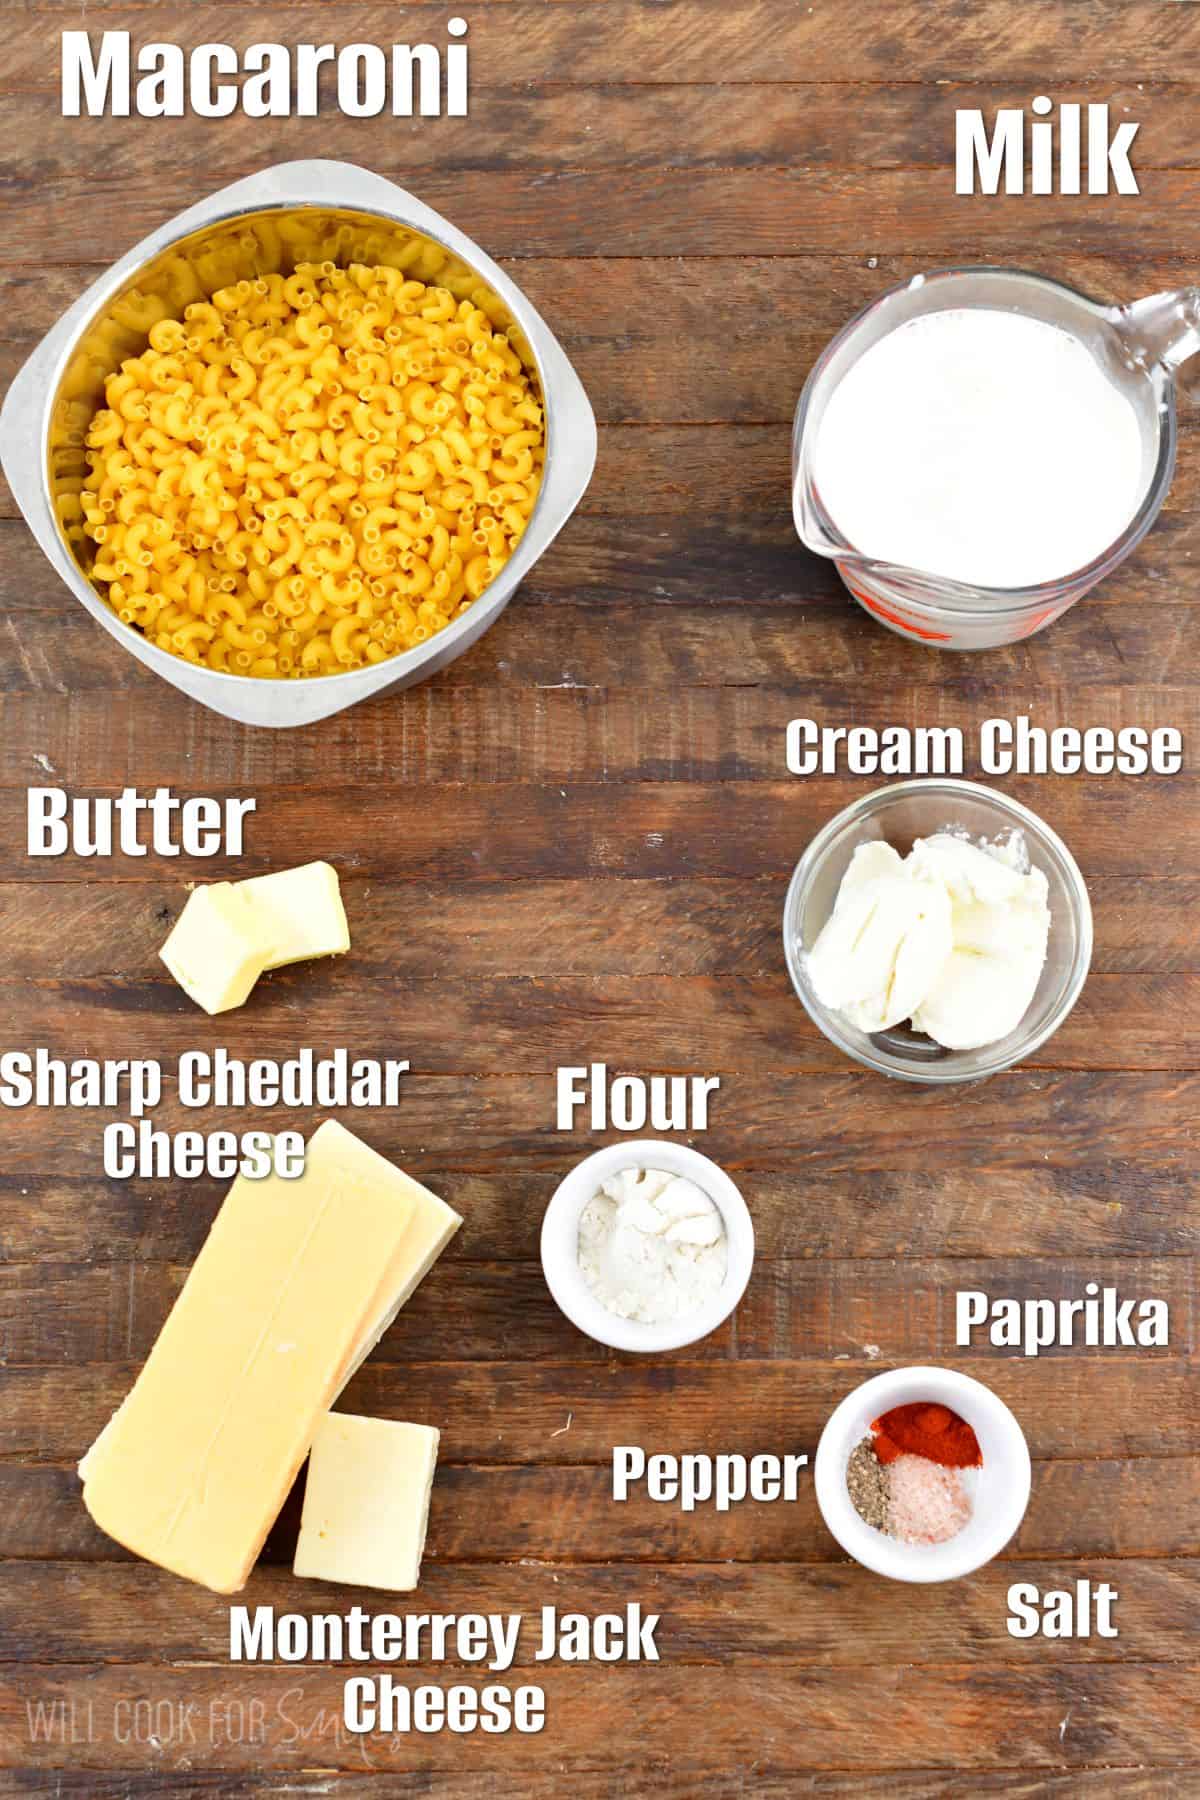 labeled ingredients to make mac and cheese on wooden board.